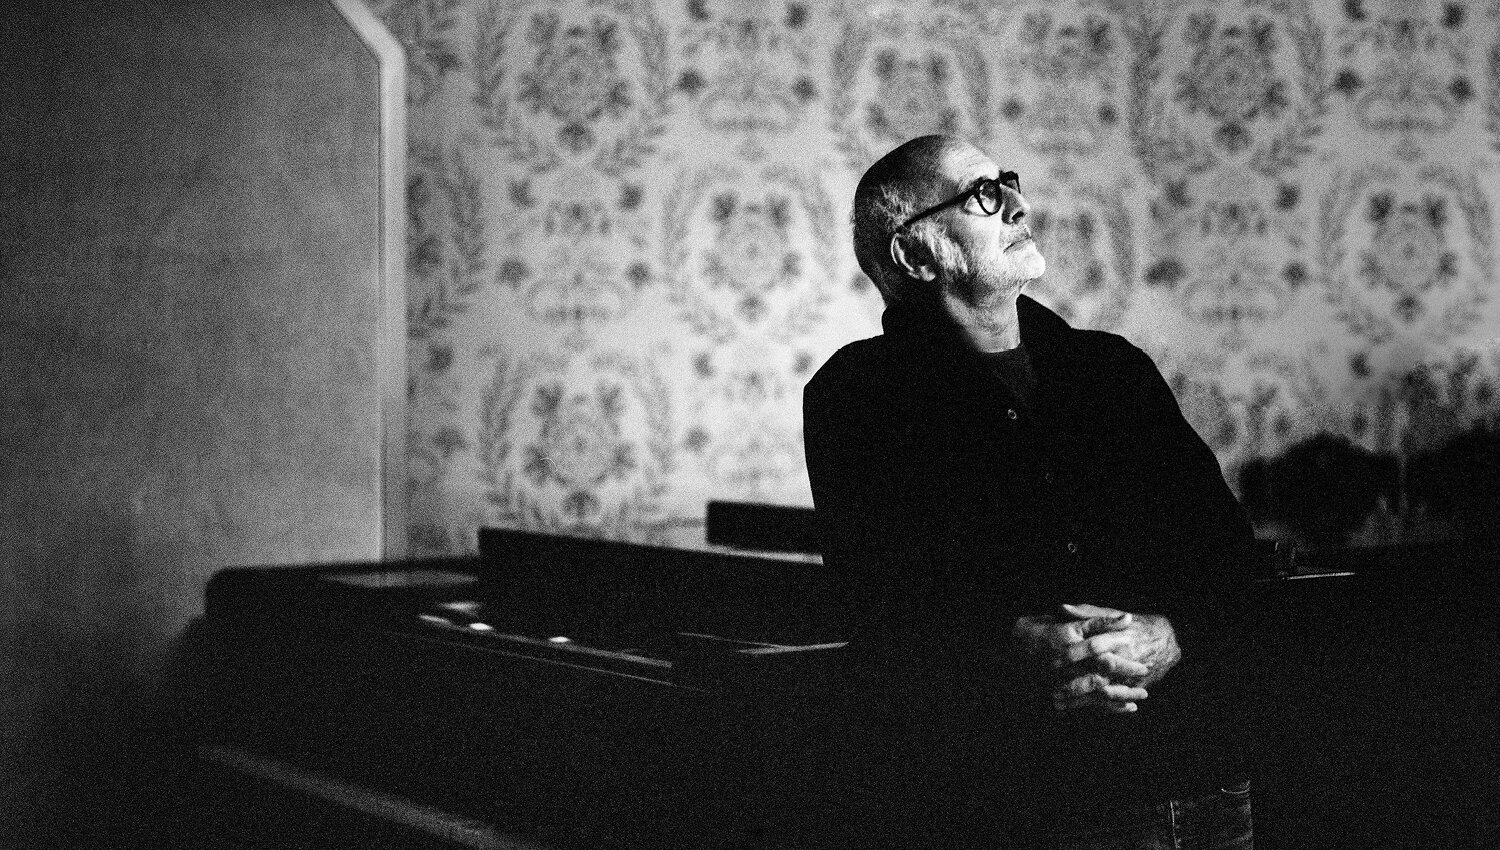 How Ludovico Einaudi Became The World's Most Popular Classical